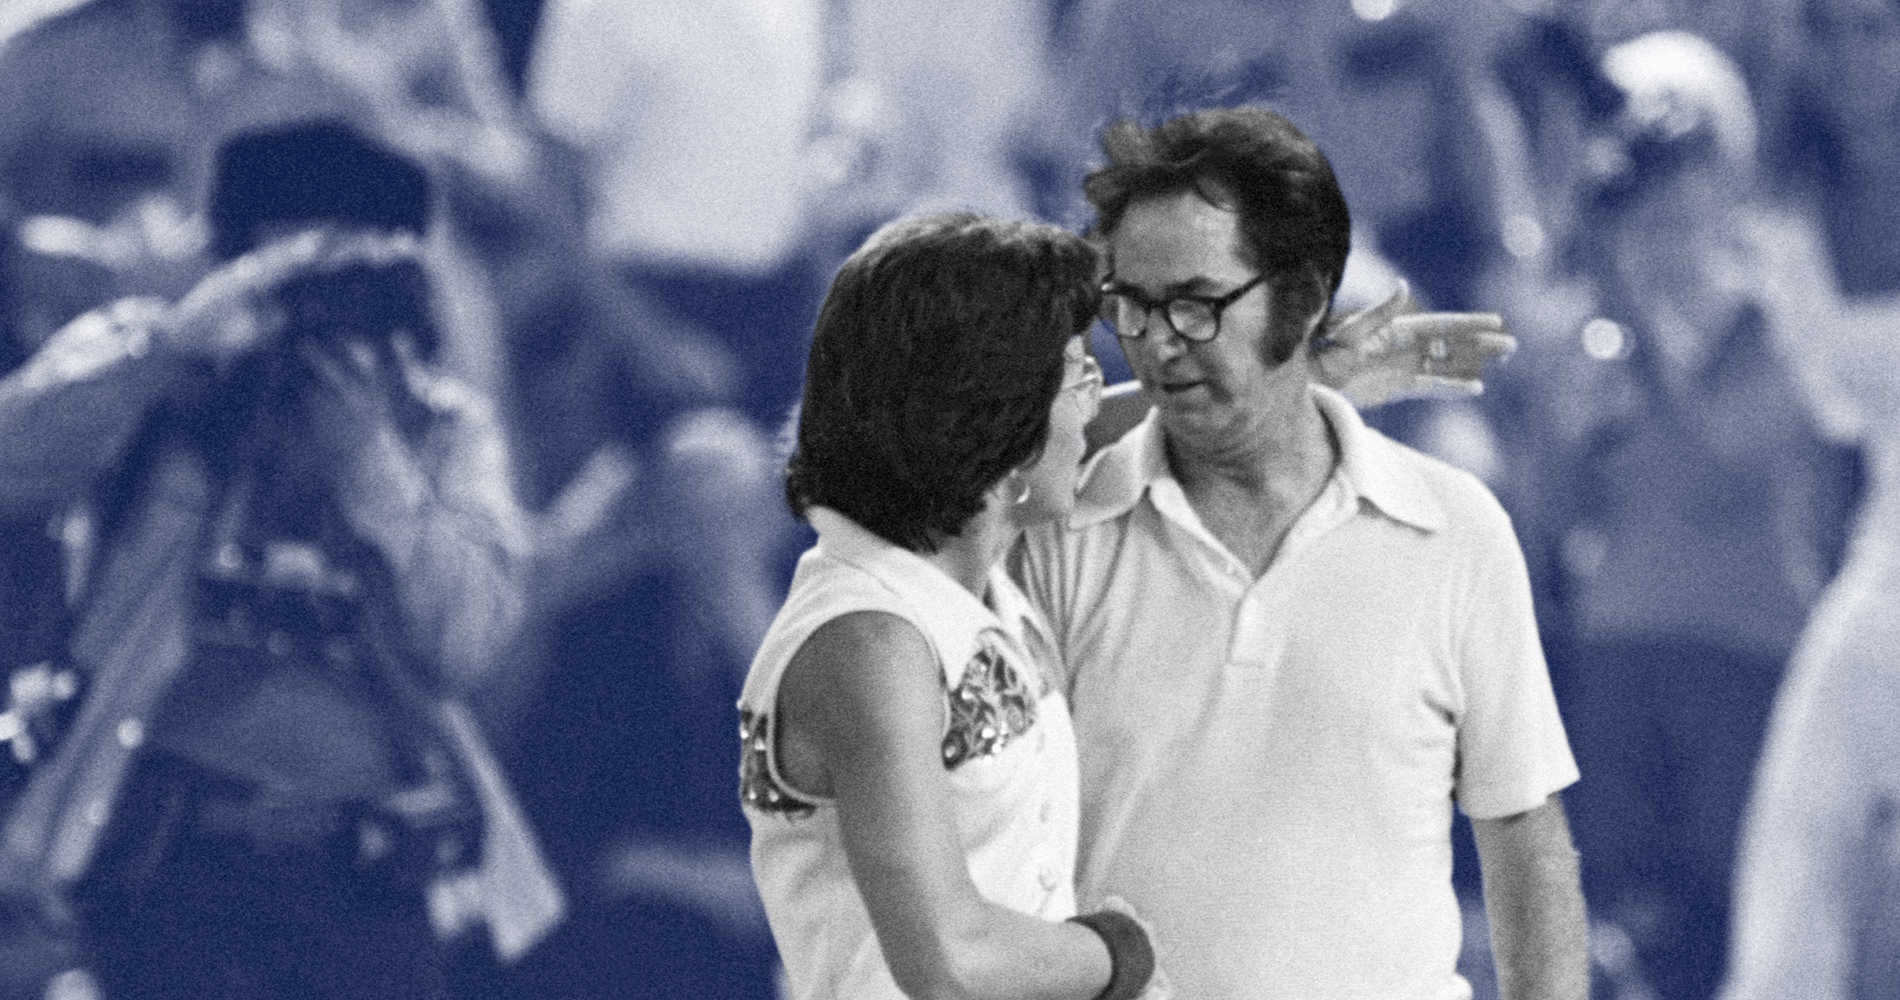 expiration Thorny melted The day Billie Jean King defeated Bobby Riggs in the famous “Battle of the  Sexes” – Tennis Majors